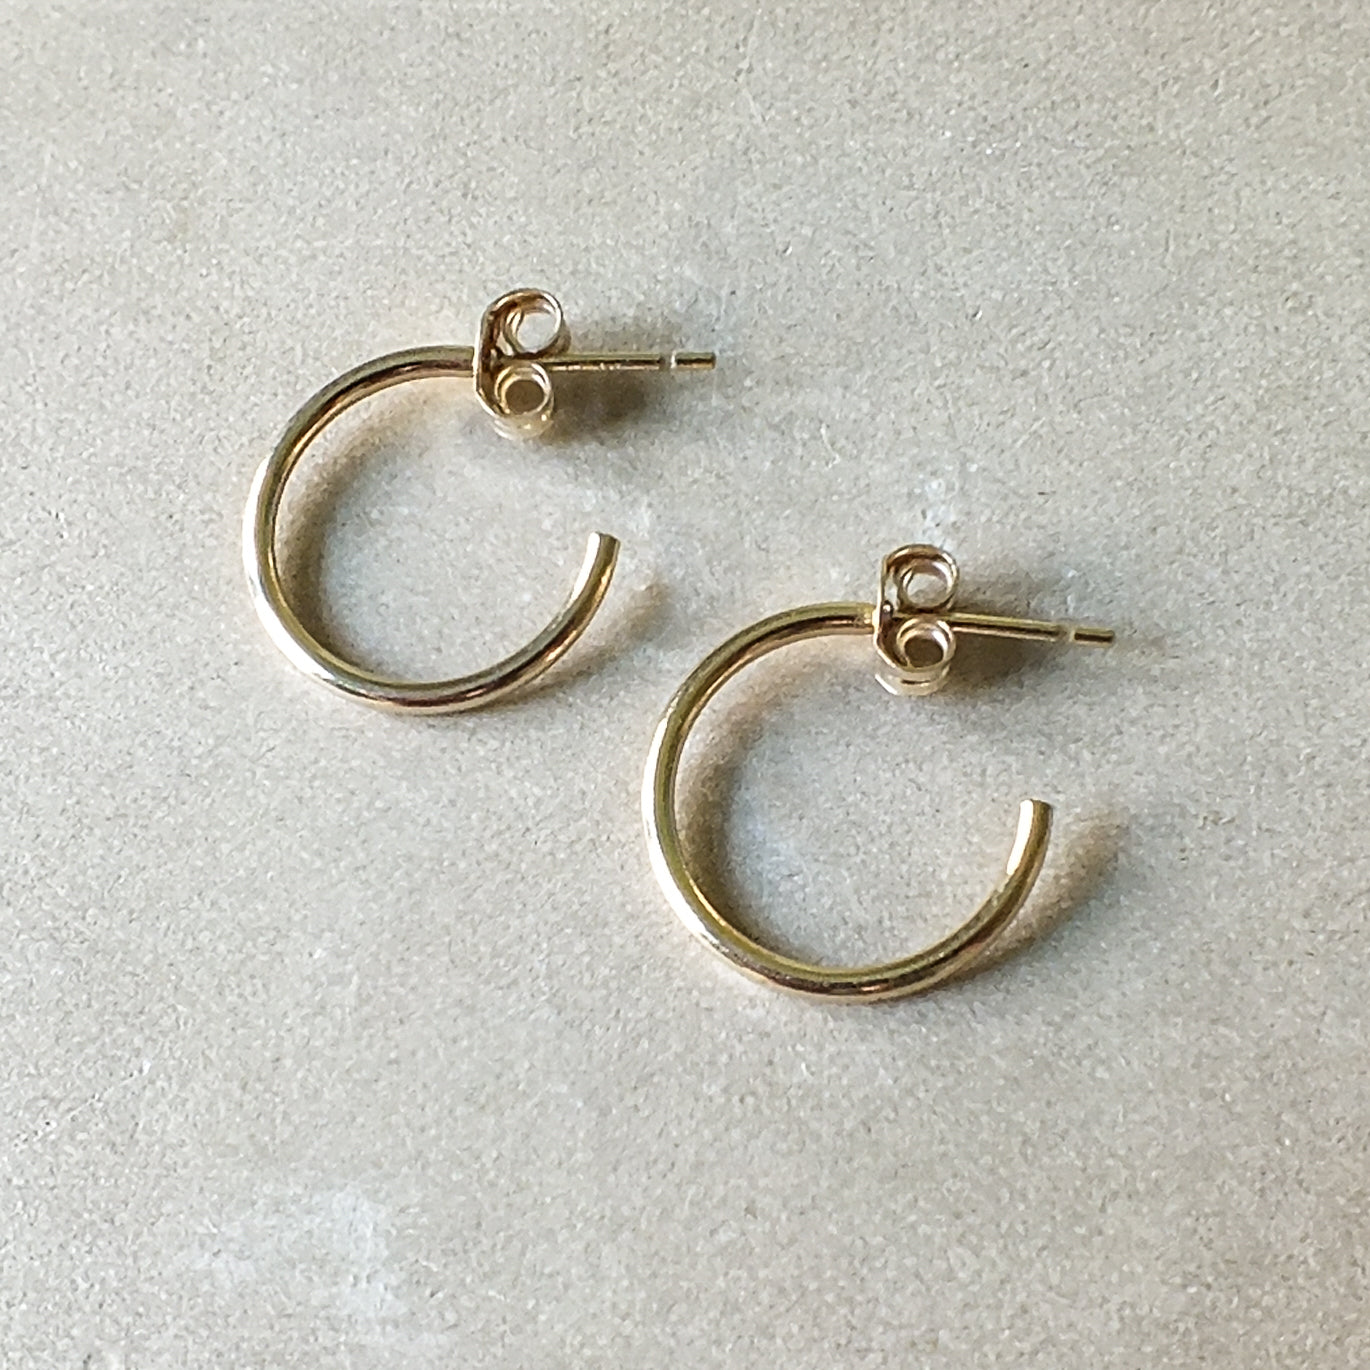 A pair of gold filled, medium-sized Open Hoop Earrings by Becoming Jewelry on a light background.